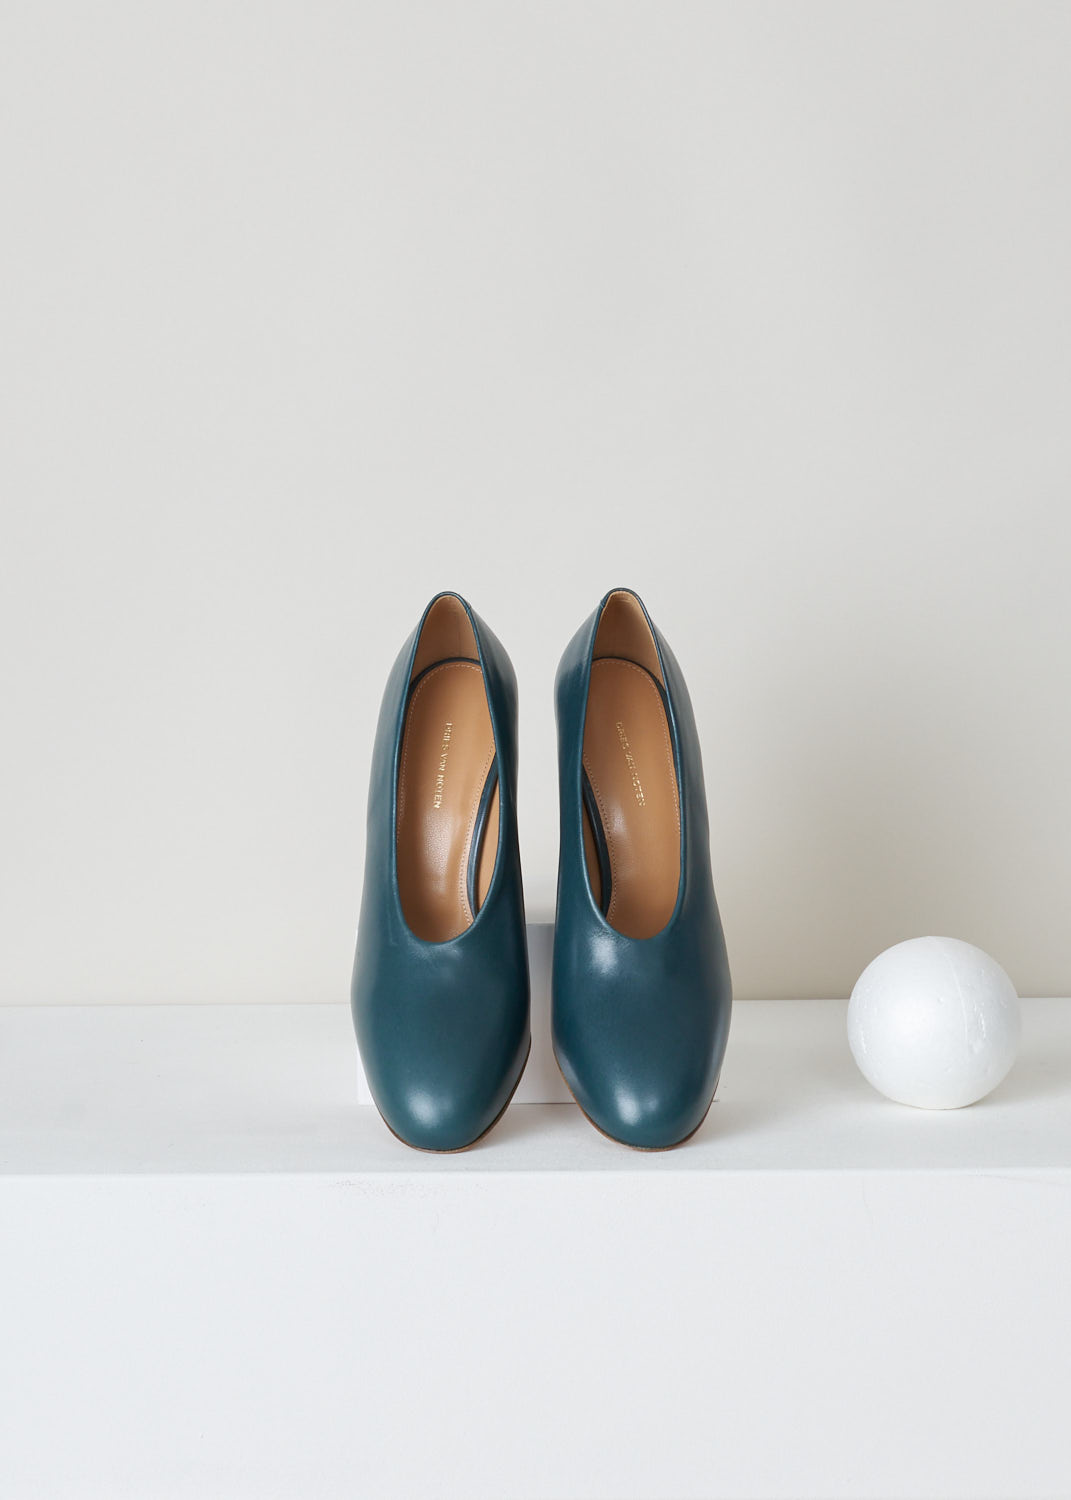 Dries van Noten, Dark aqua color platform pumps, WS26_765_H80_QU303_aqua500, blue, top, Crafted from leather colored in a dark aqua tint. featuring a platform to raise the height of the pump. Comes with a round toe section. 

Heel height: 10 cm / 3.9 inch. 